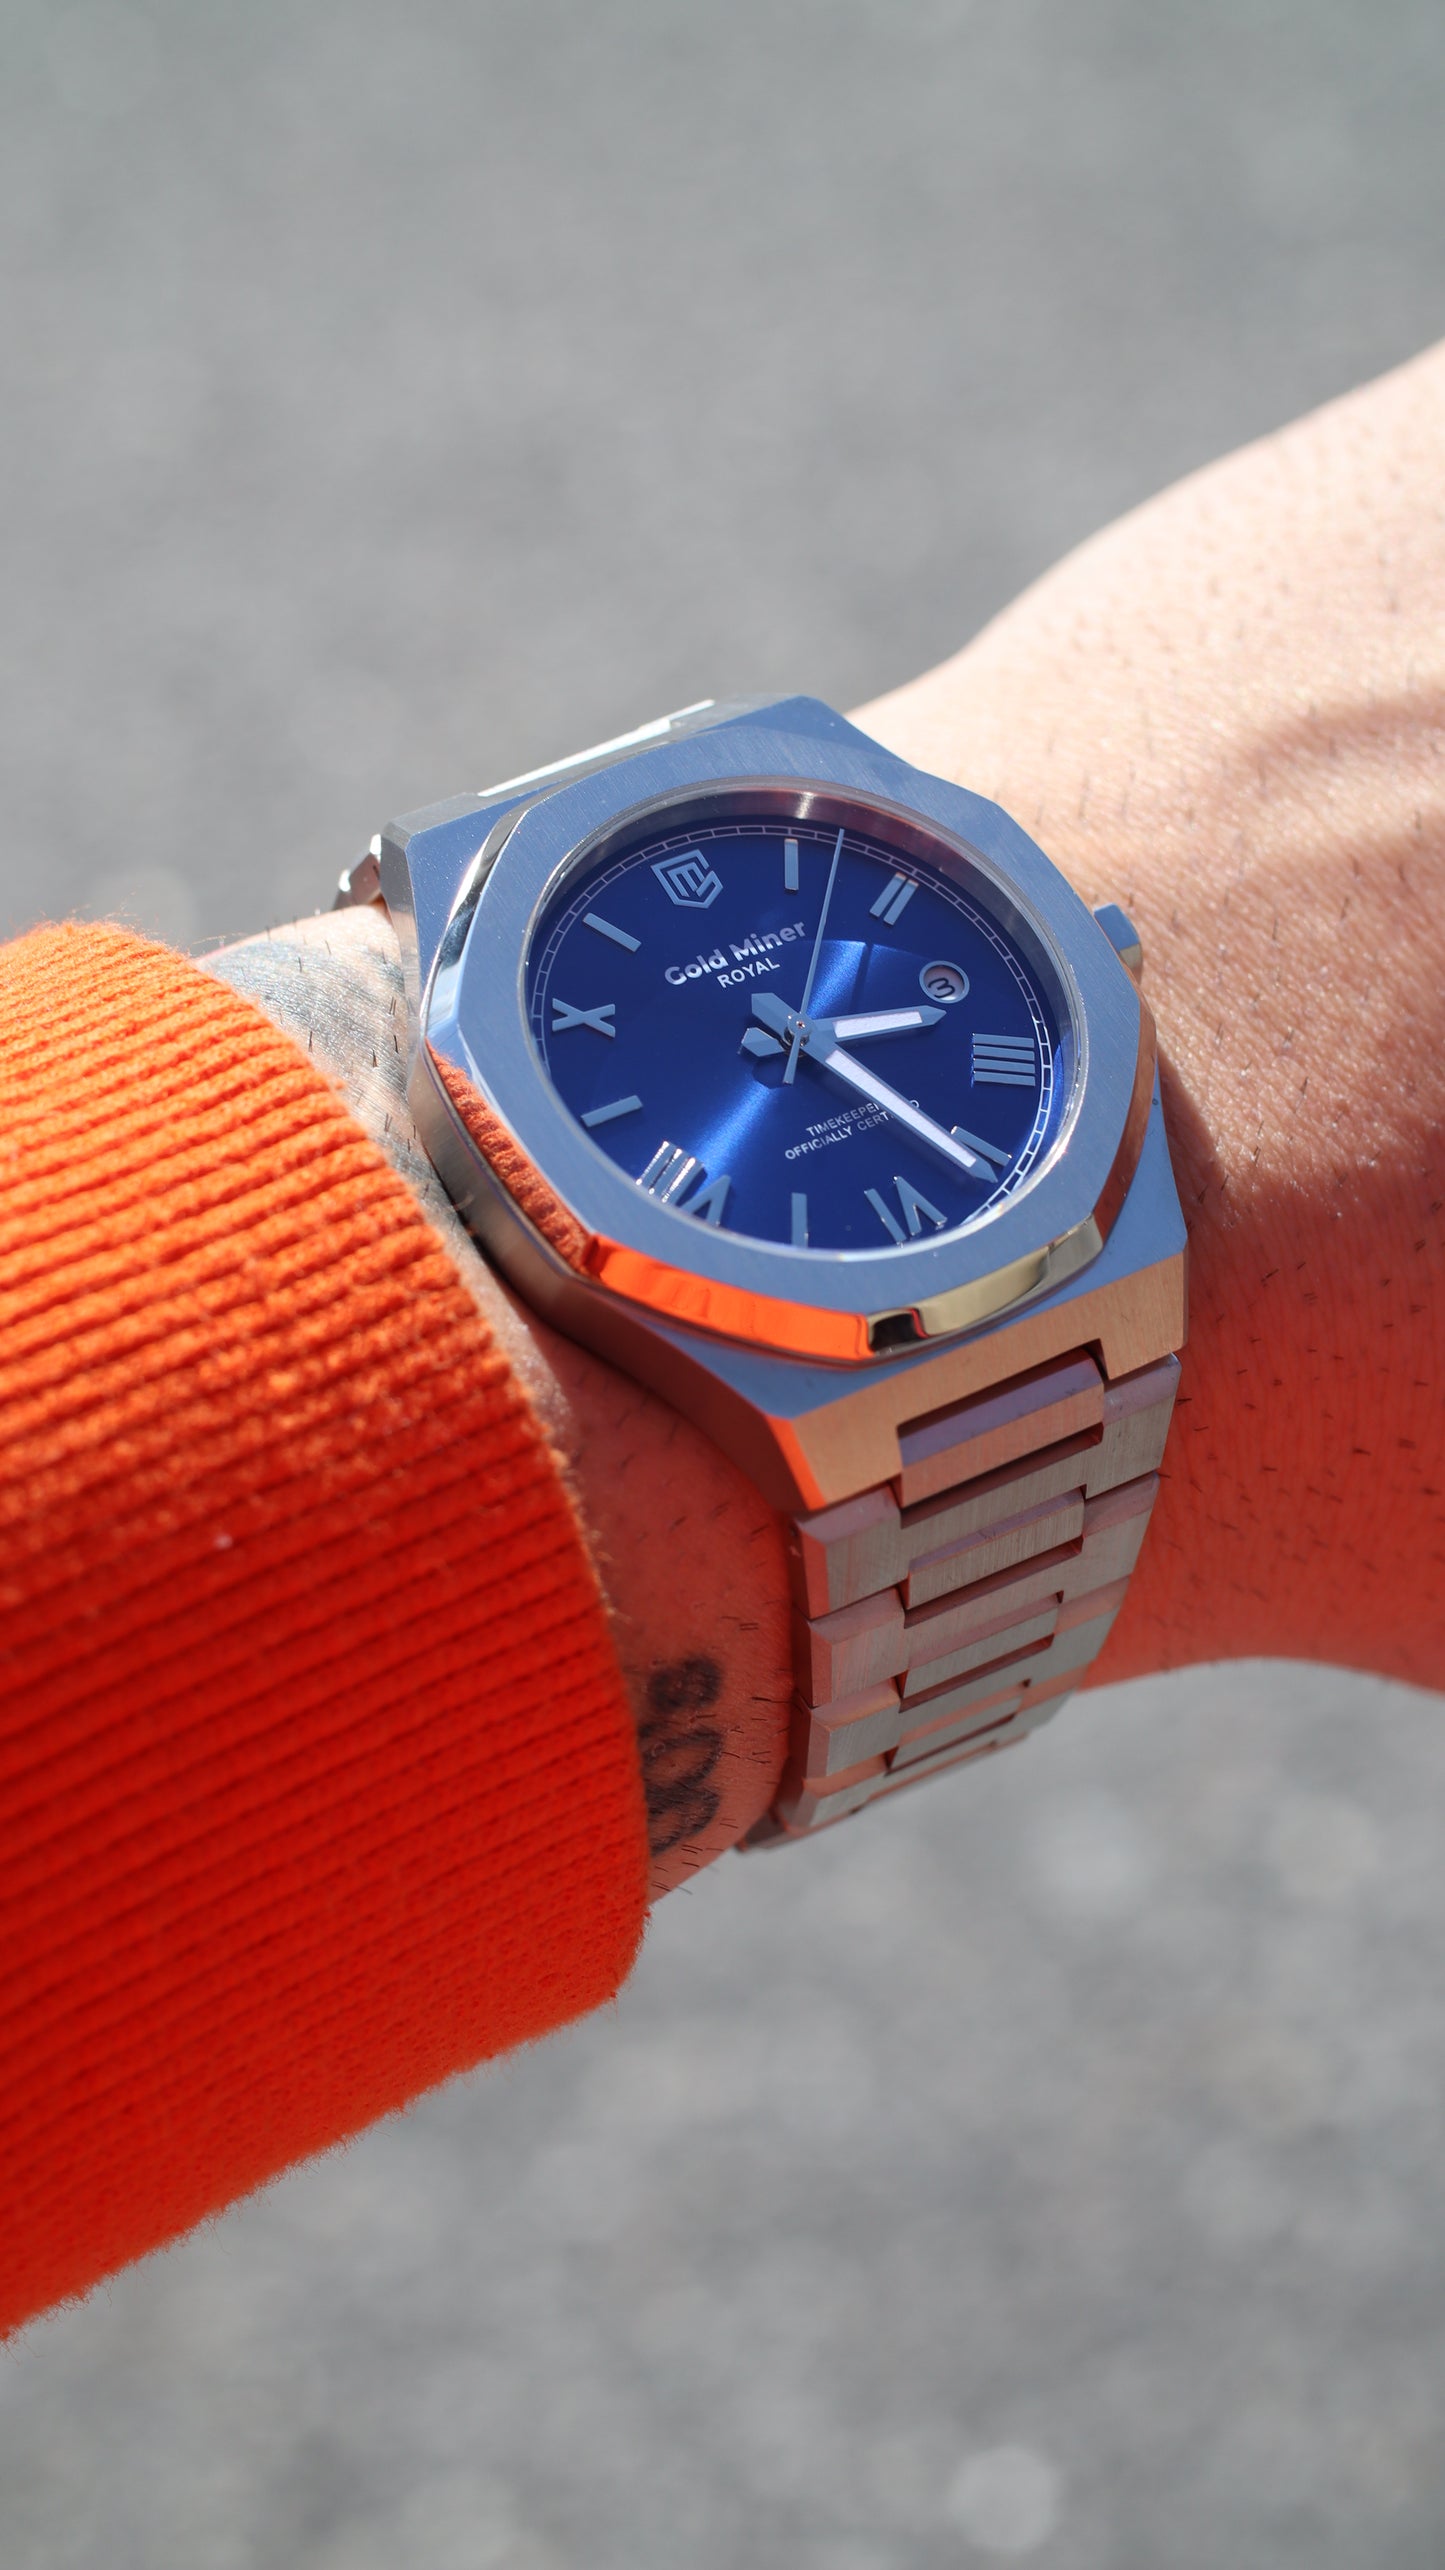 The GoldMiner Watch - Royal Blue